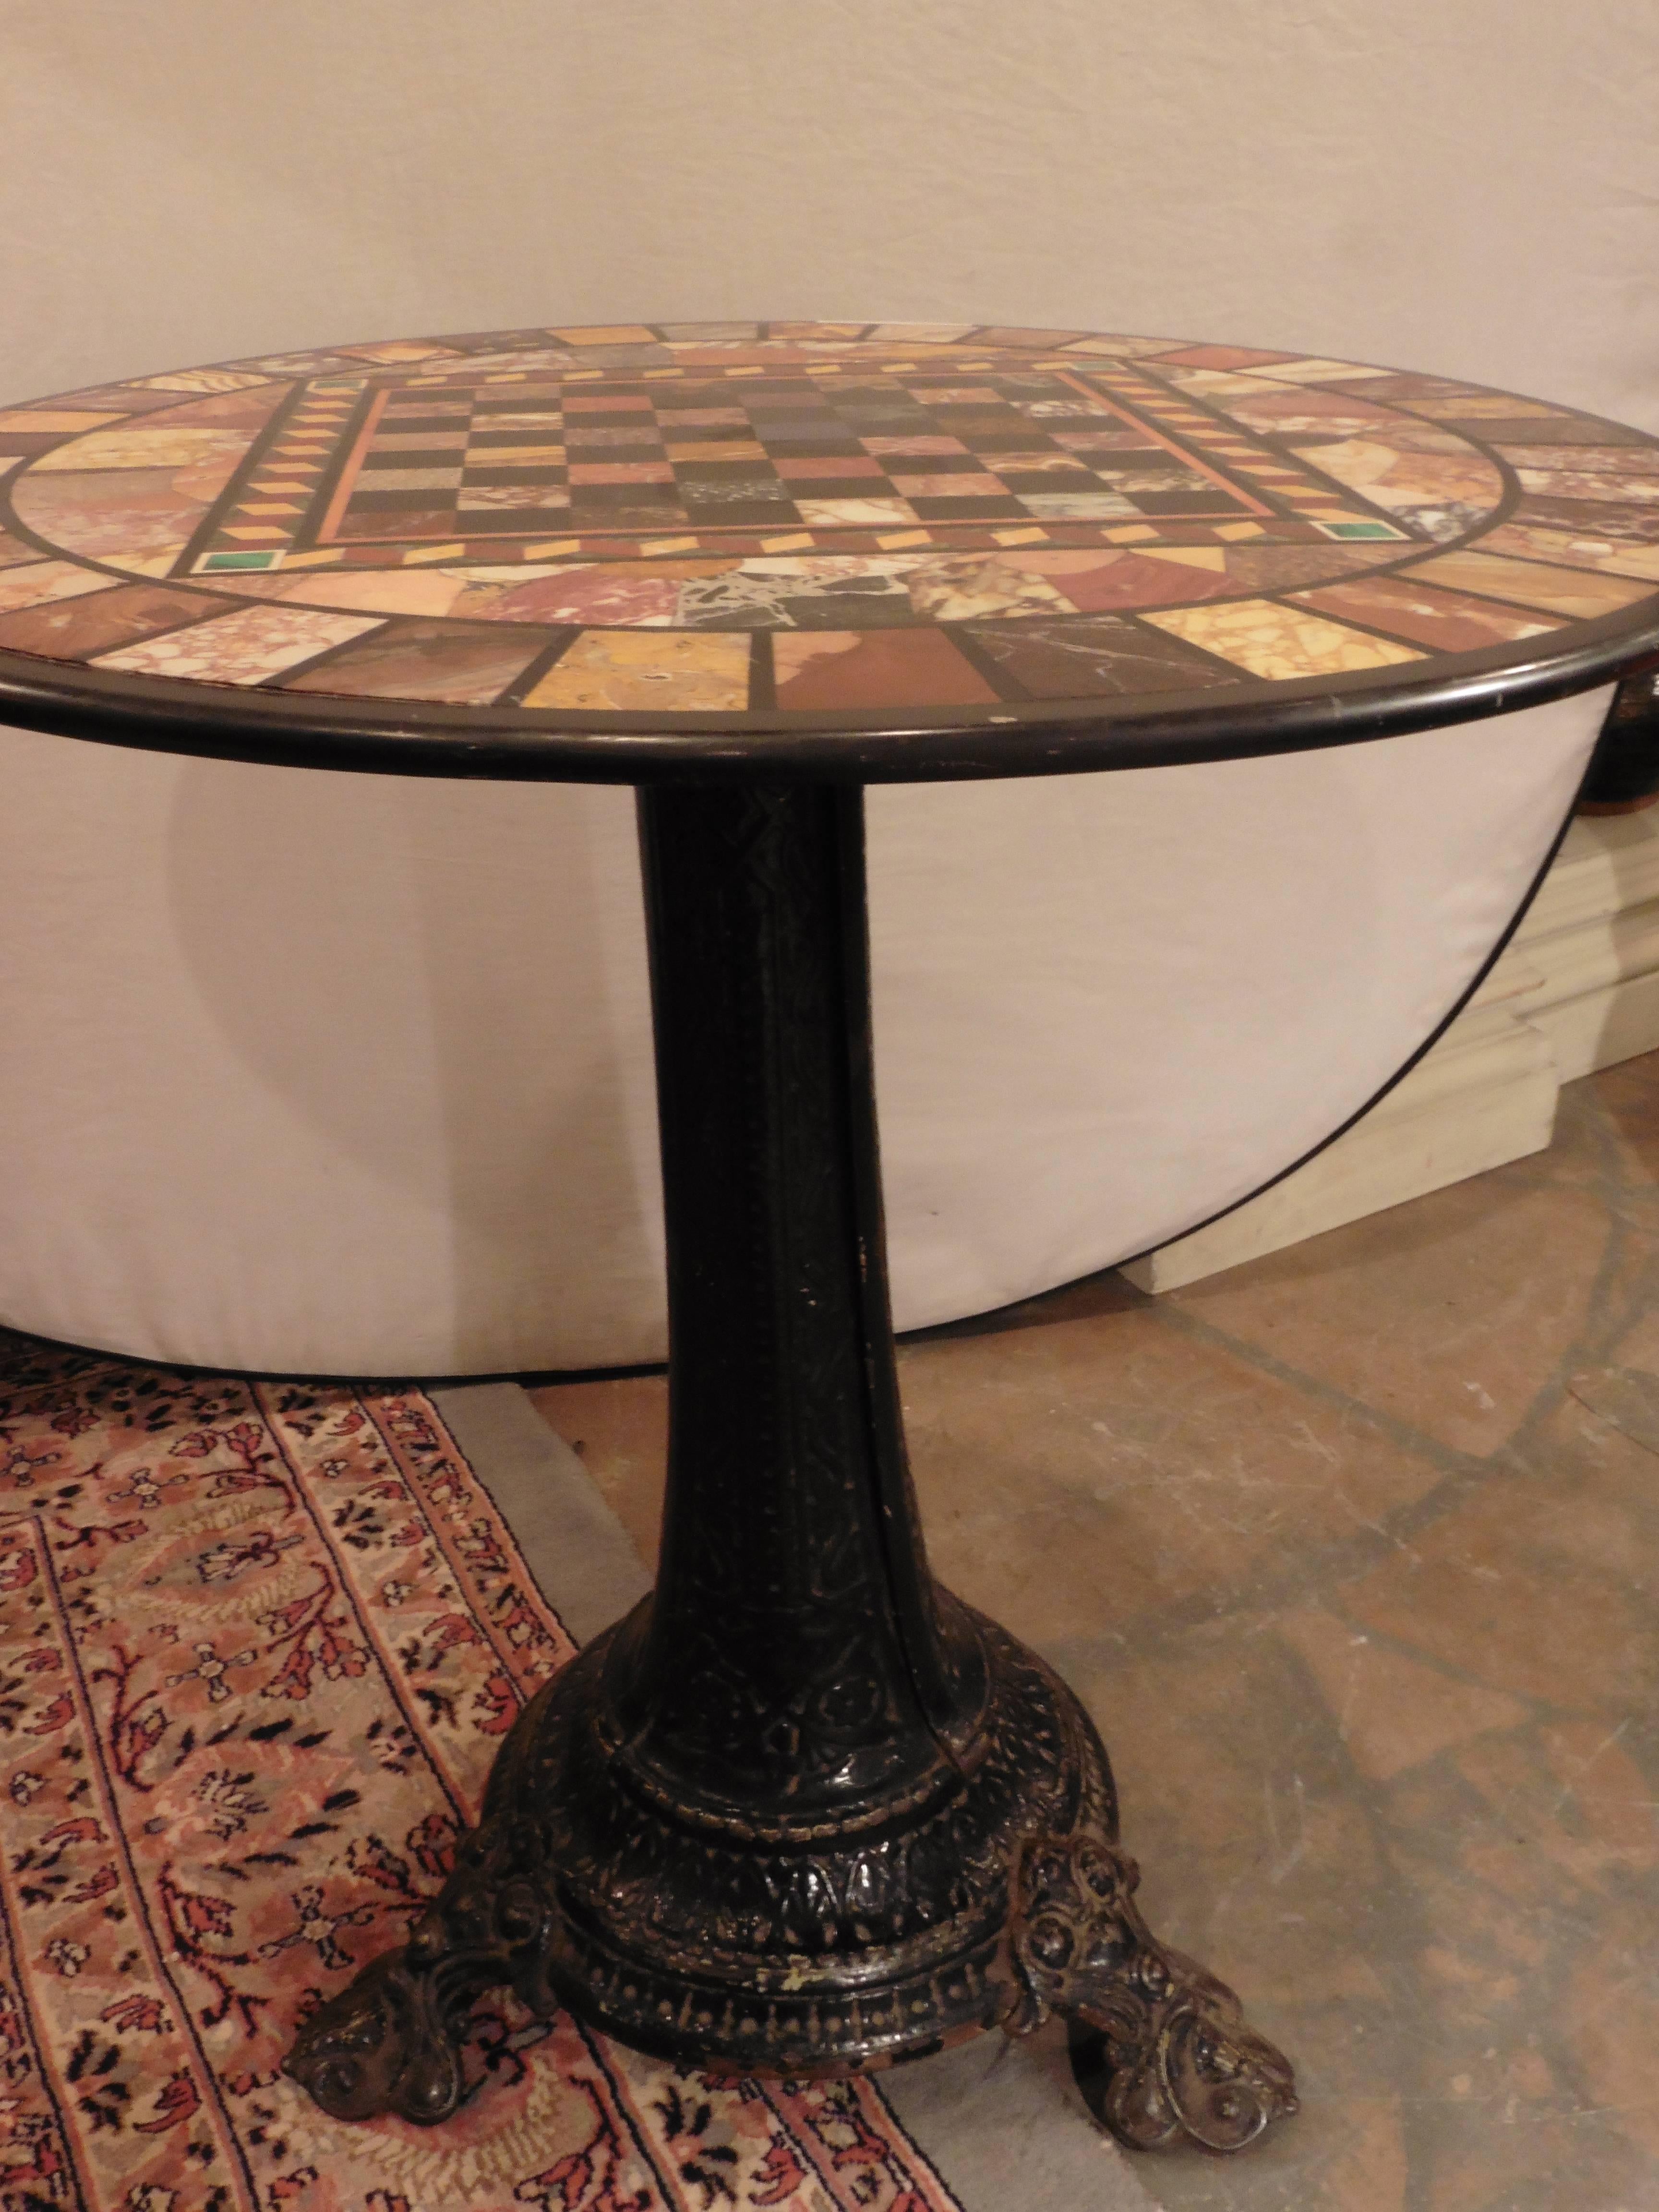 Italian Specimen Marble-Top Games Table on Cast Iron Base, circa 1840 For Sale 3